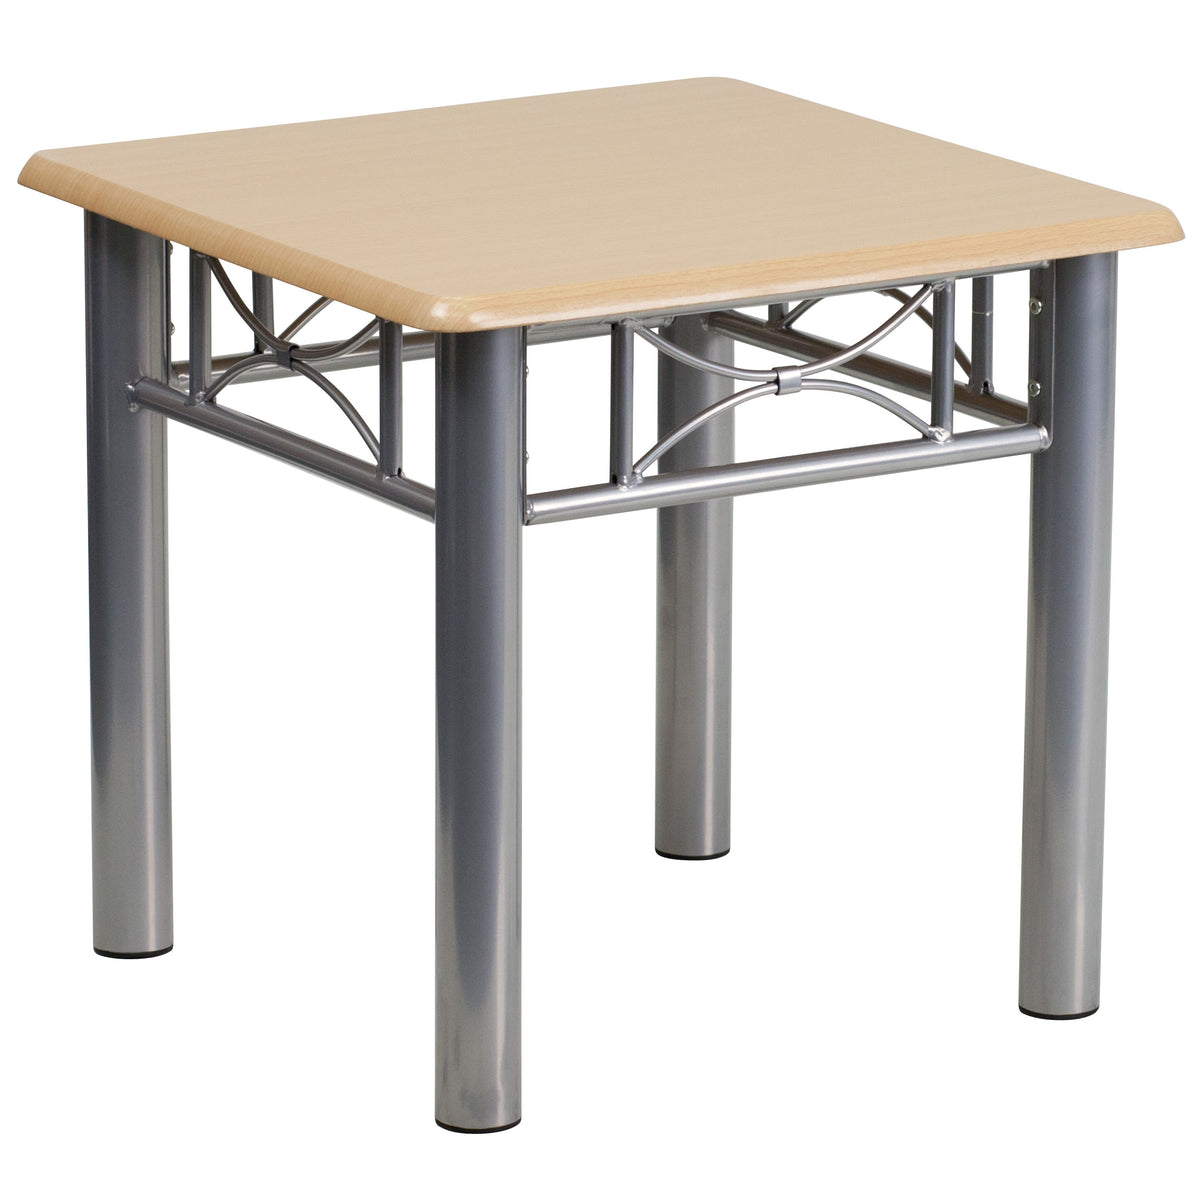 Natural |#| Natural Laminate End Table with Silver Steel Frame - Occasional Table